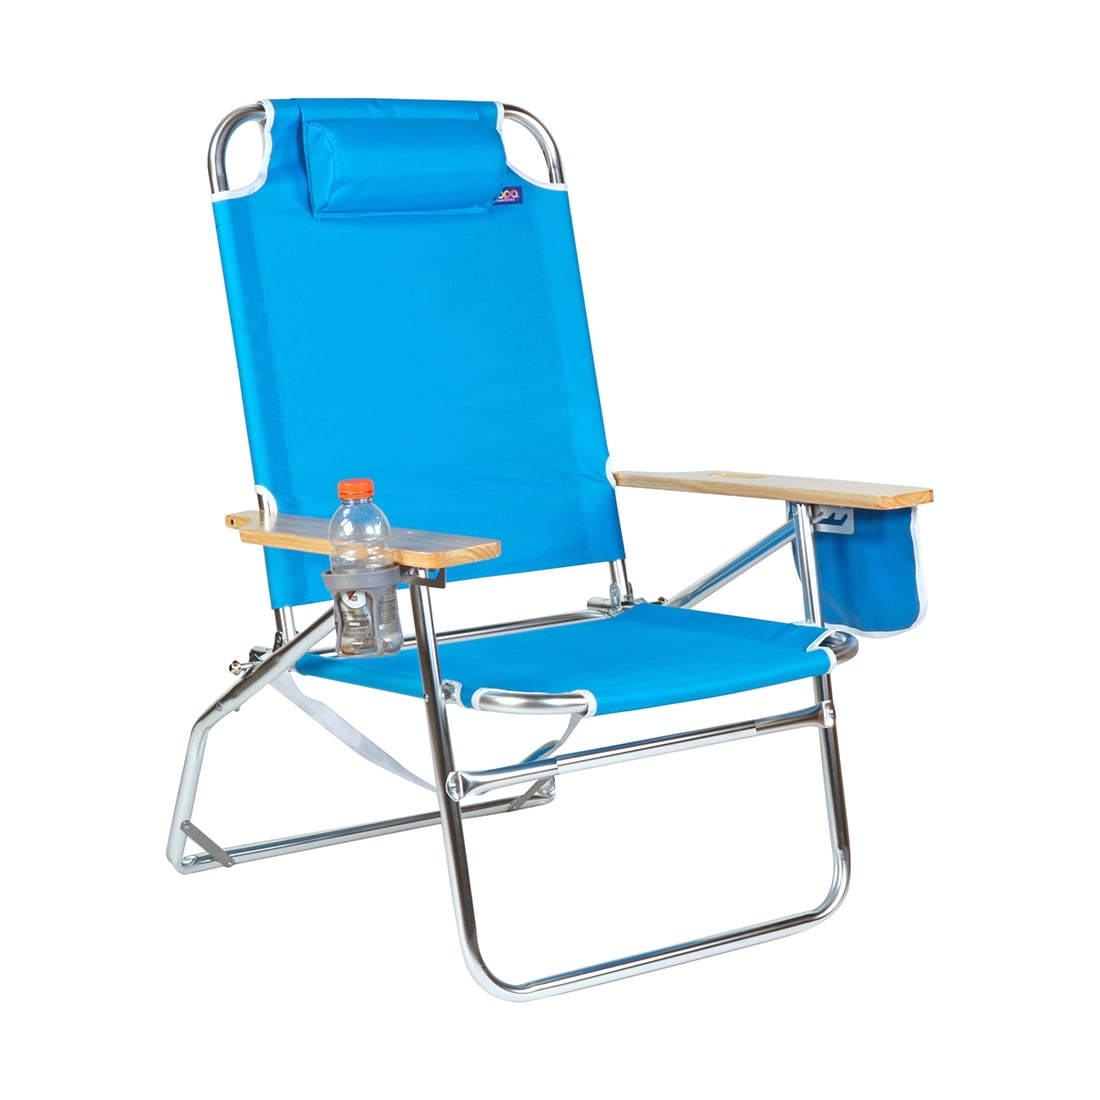 high weight capacity outdoor chairs